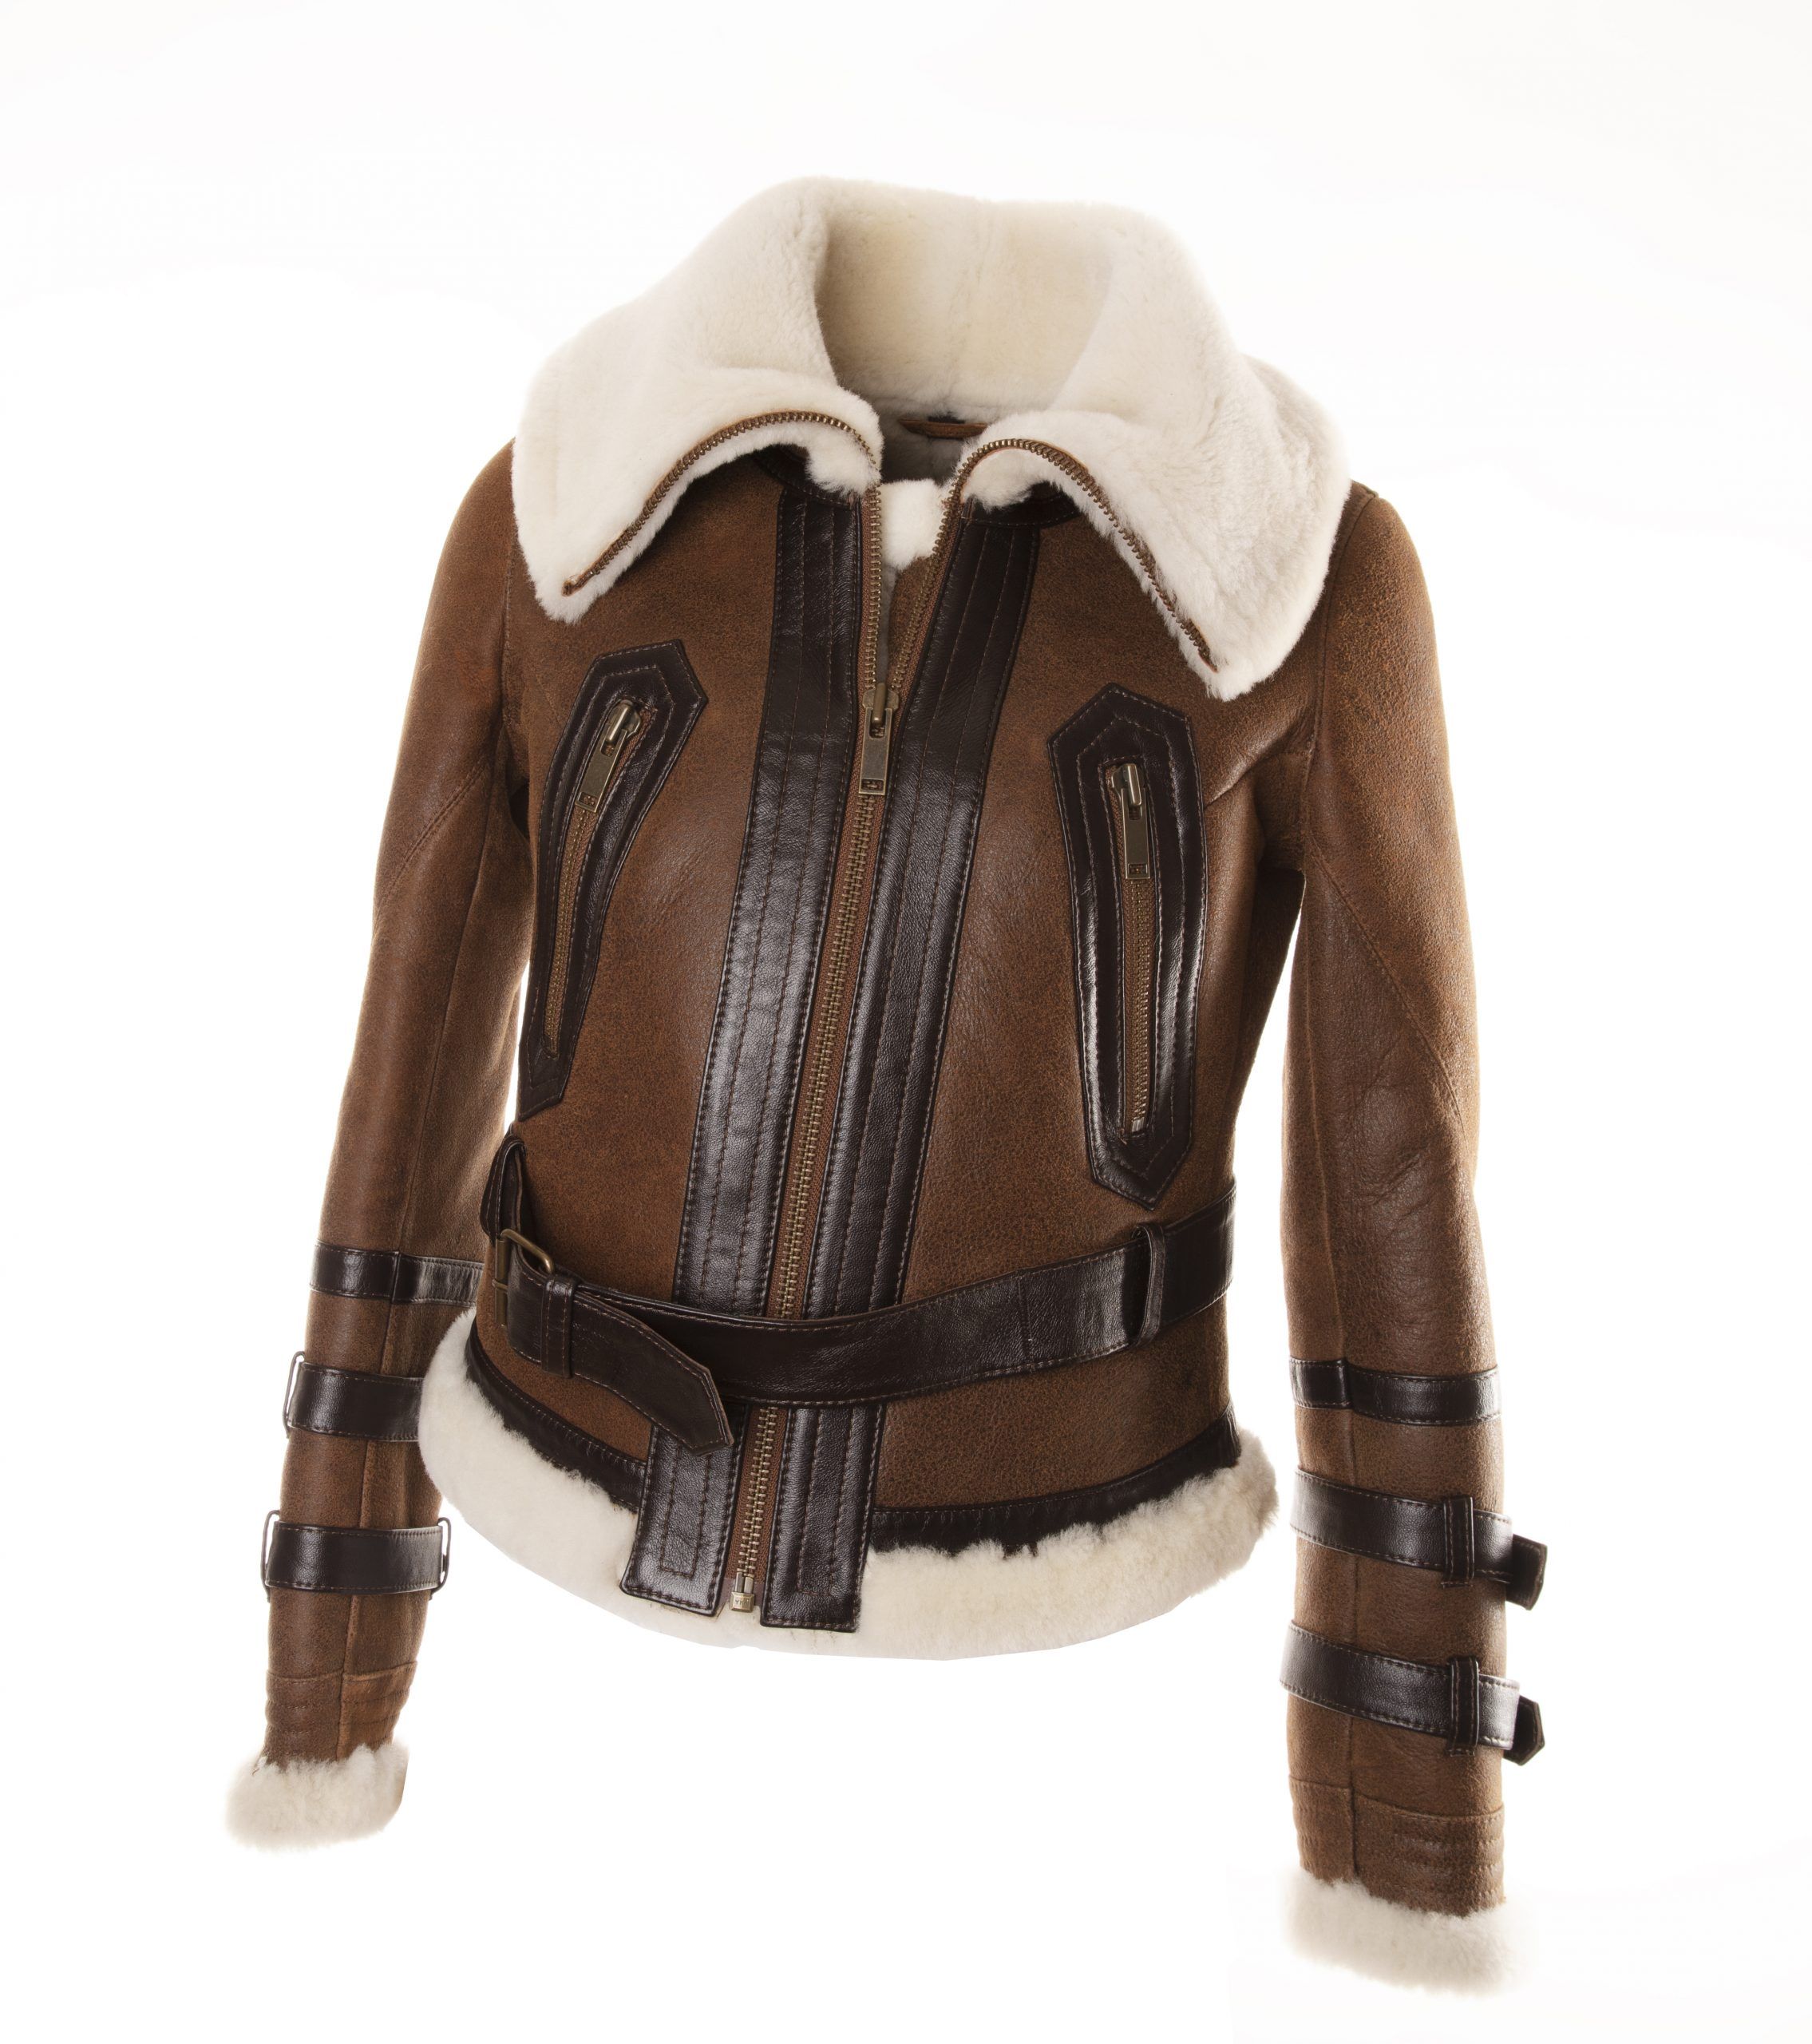 The Aspen Shearling - Second Skin Leather and Sheepskin Clothing